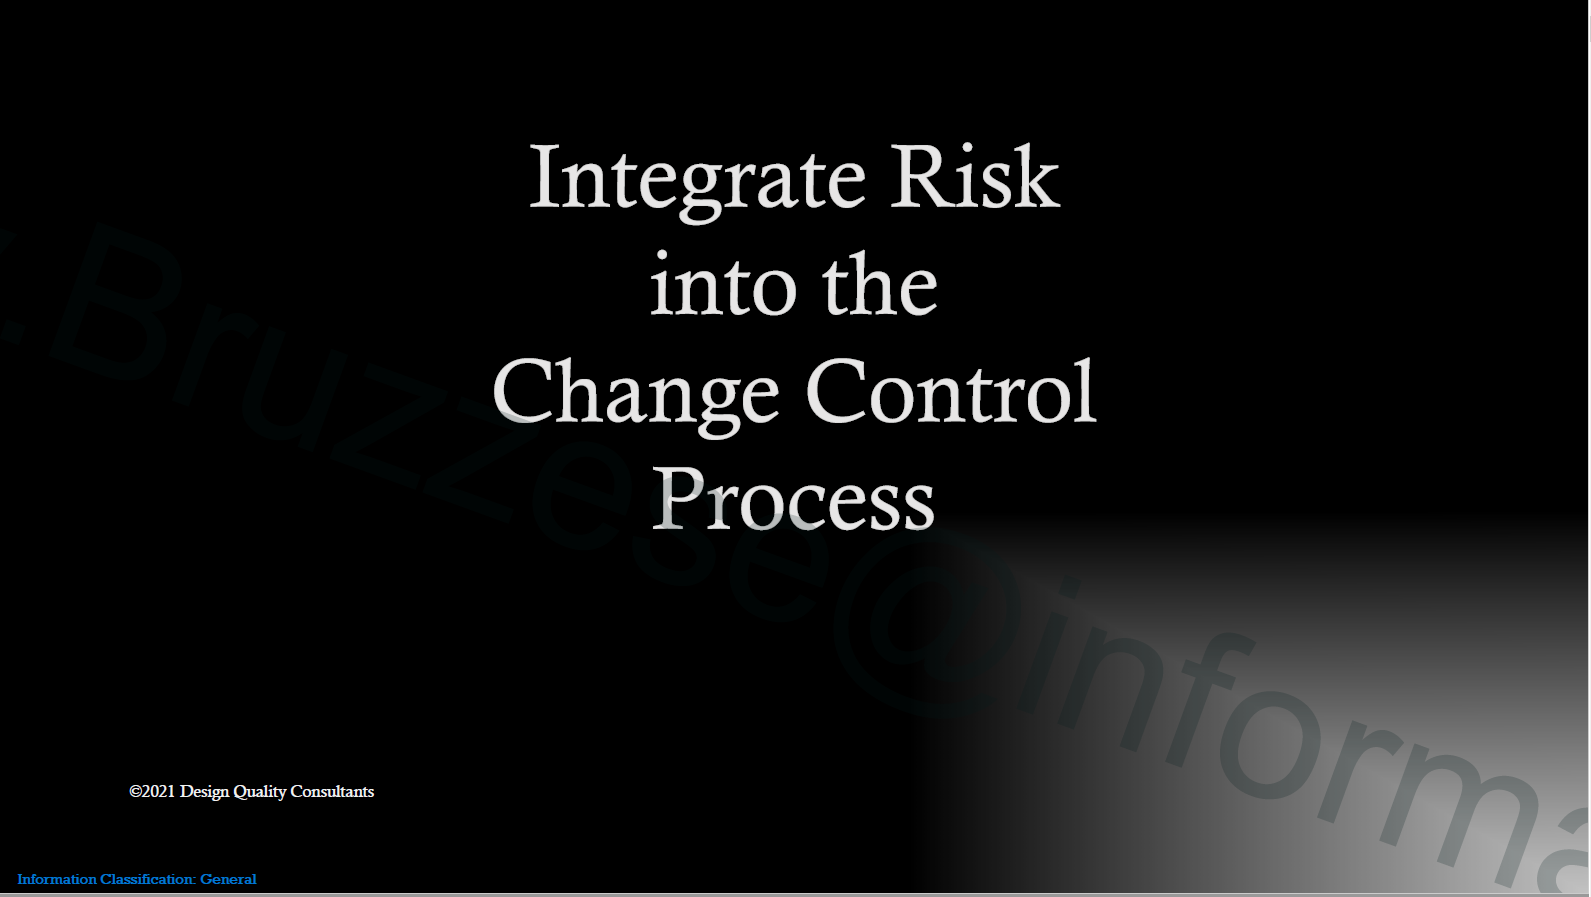 Video: Integrate Risk Into Change Control